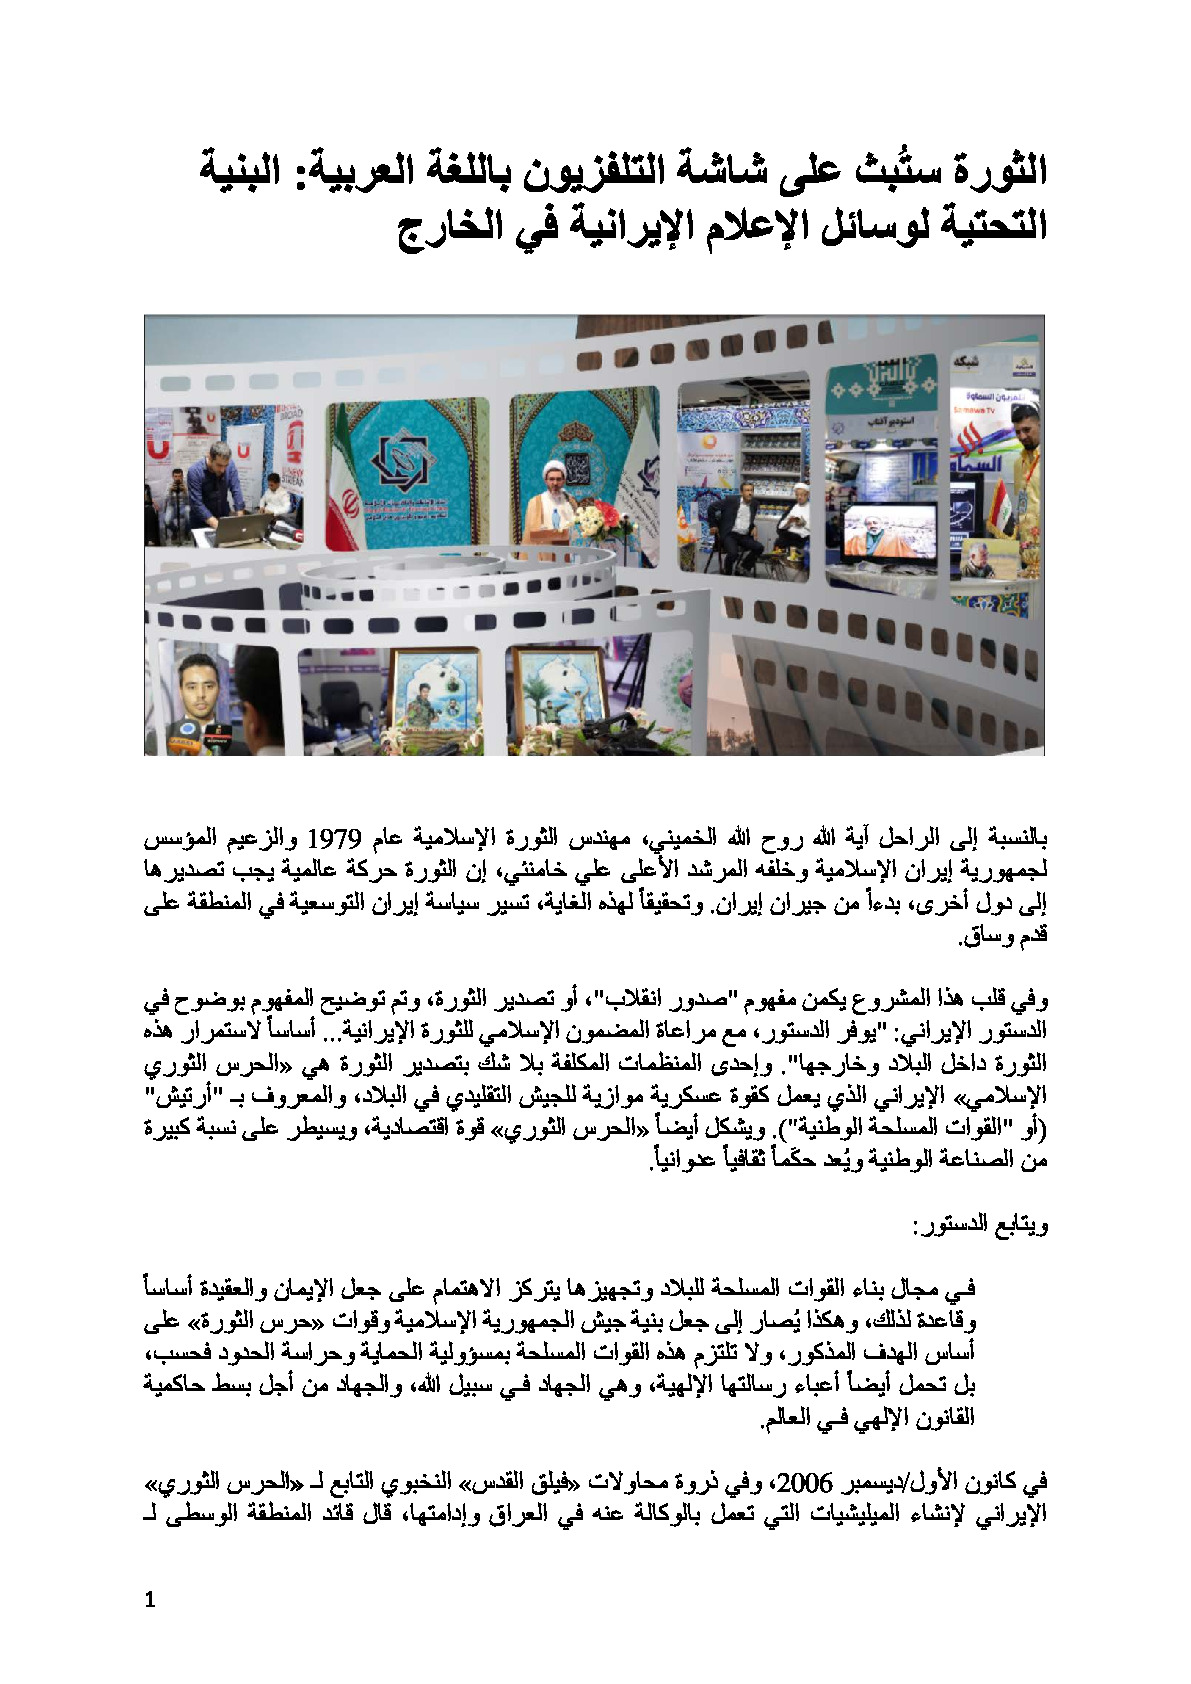 The Revolution Will Be Televised in Arabic_Iran’s Media Infrastructure Abroad_AR.pdf